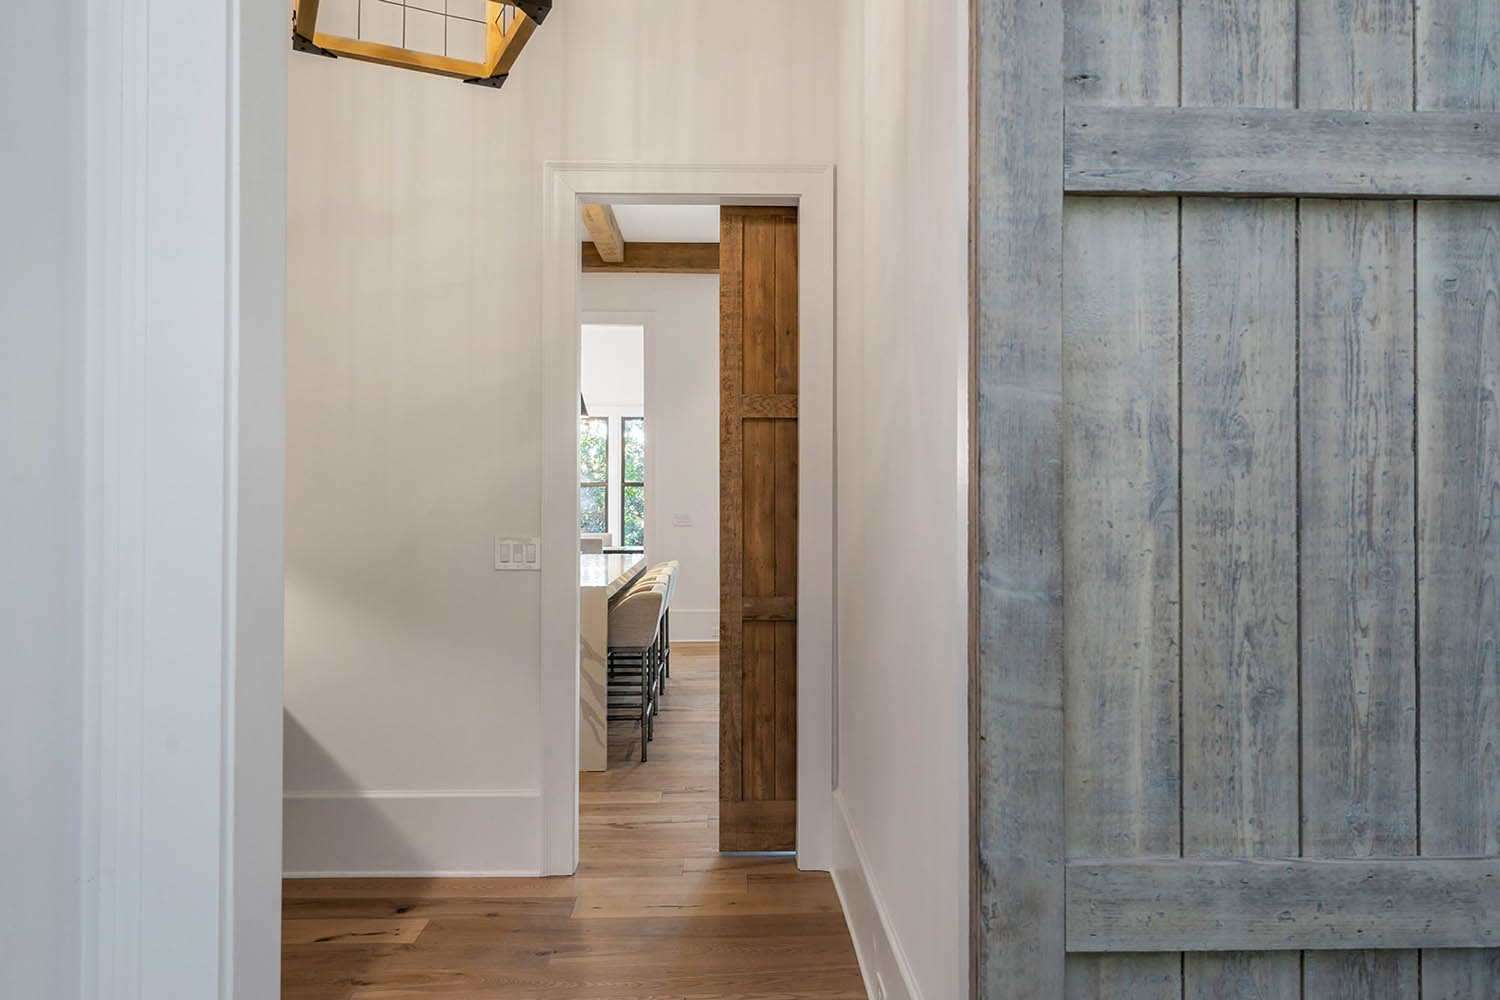 Aged gray wood barn doors with a vintage style. Closeup view of the front and back side.